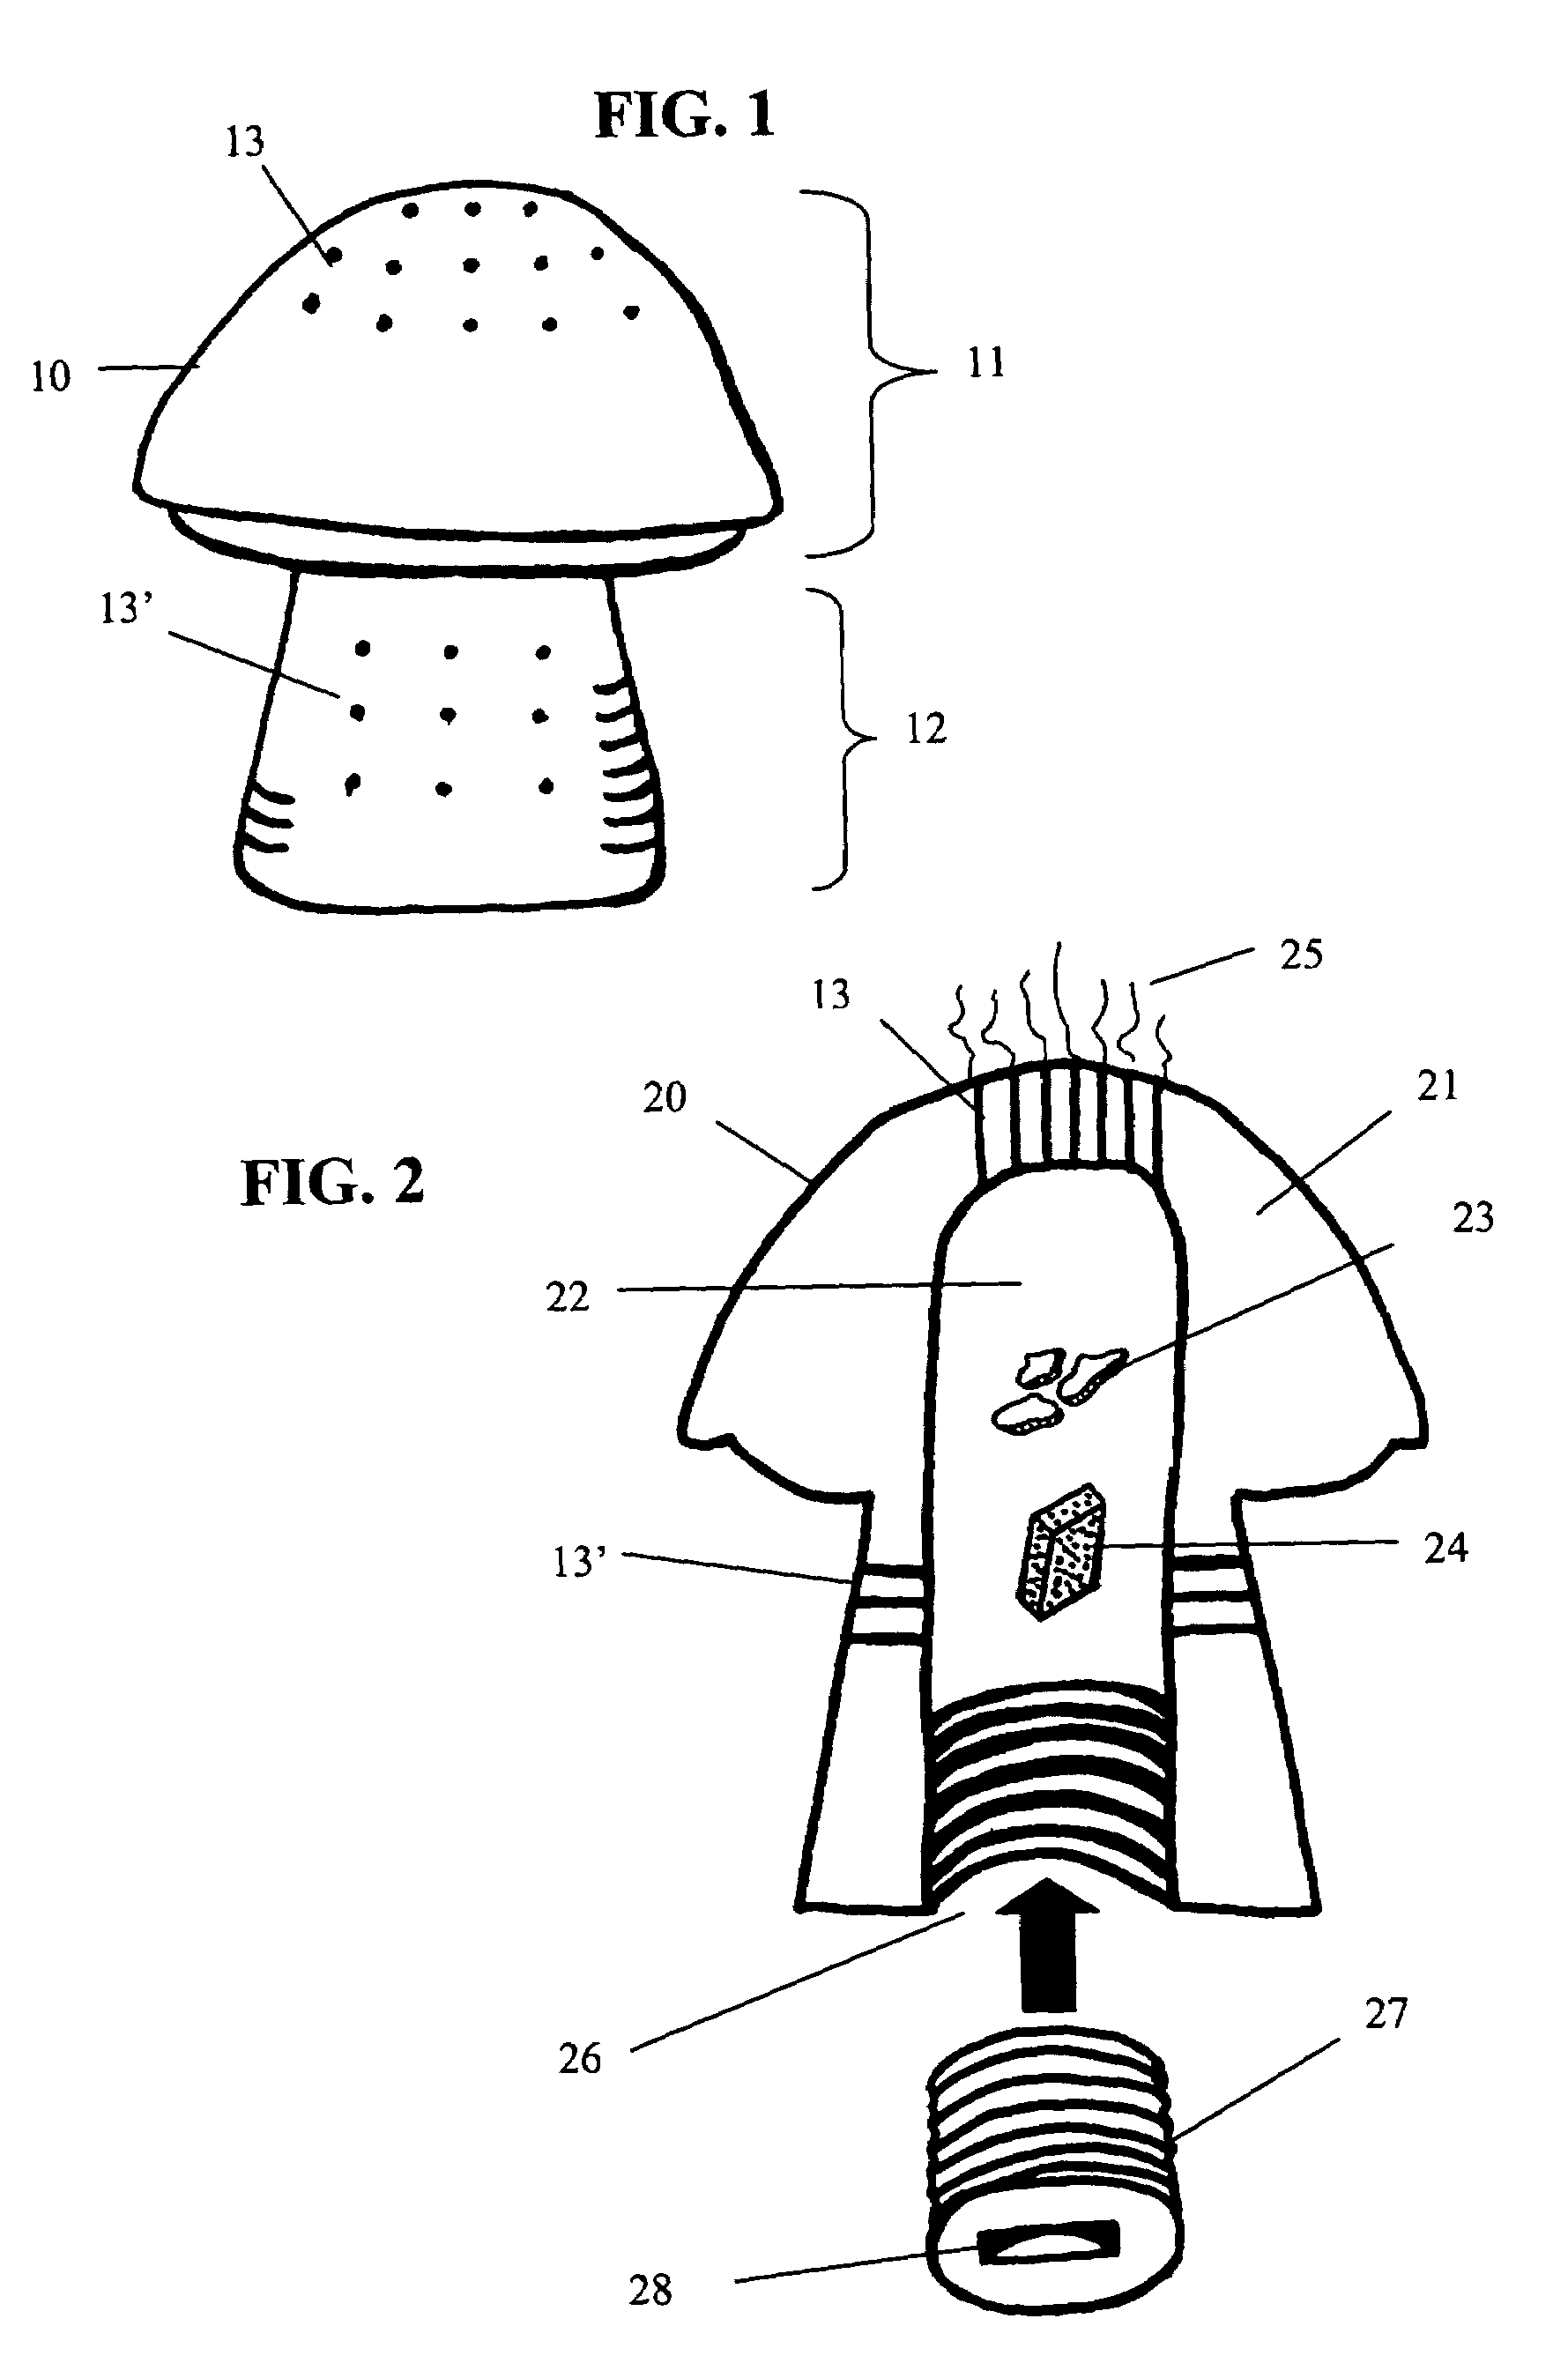 Mushroom-shaped pet chew toy scent training device and method of training therewith